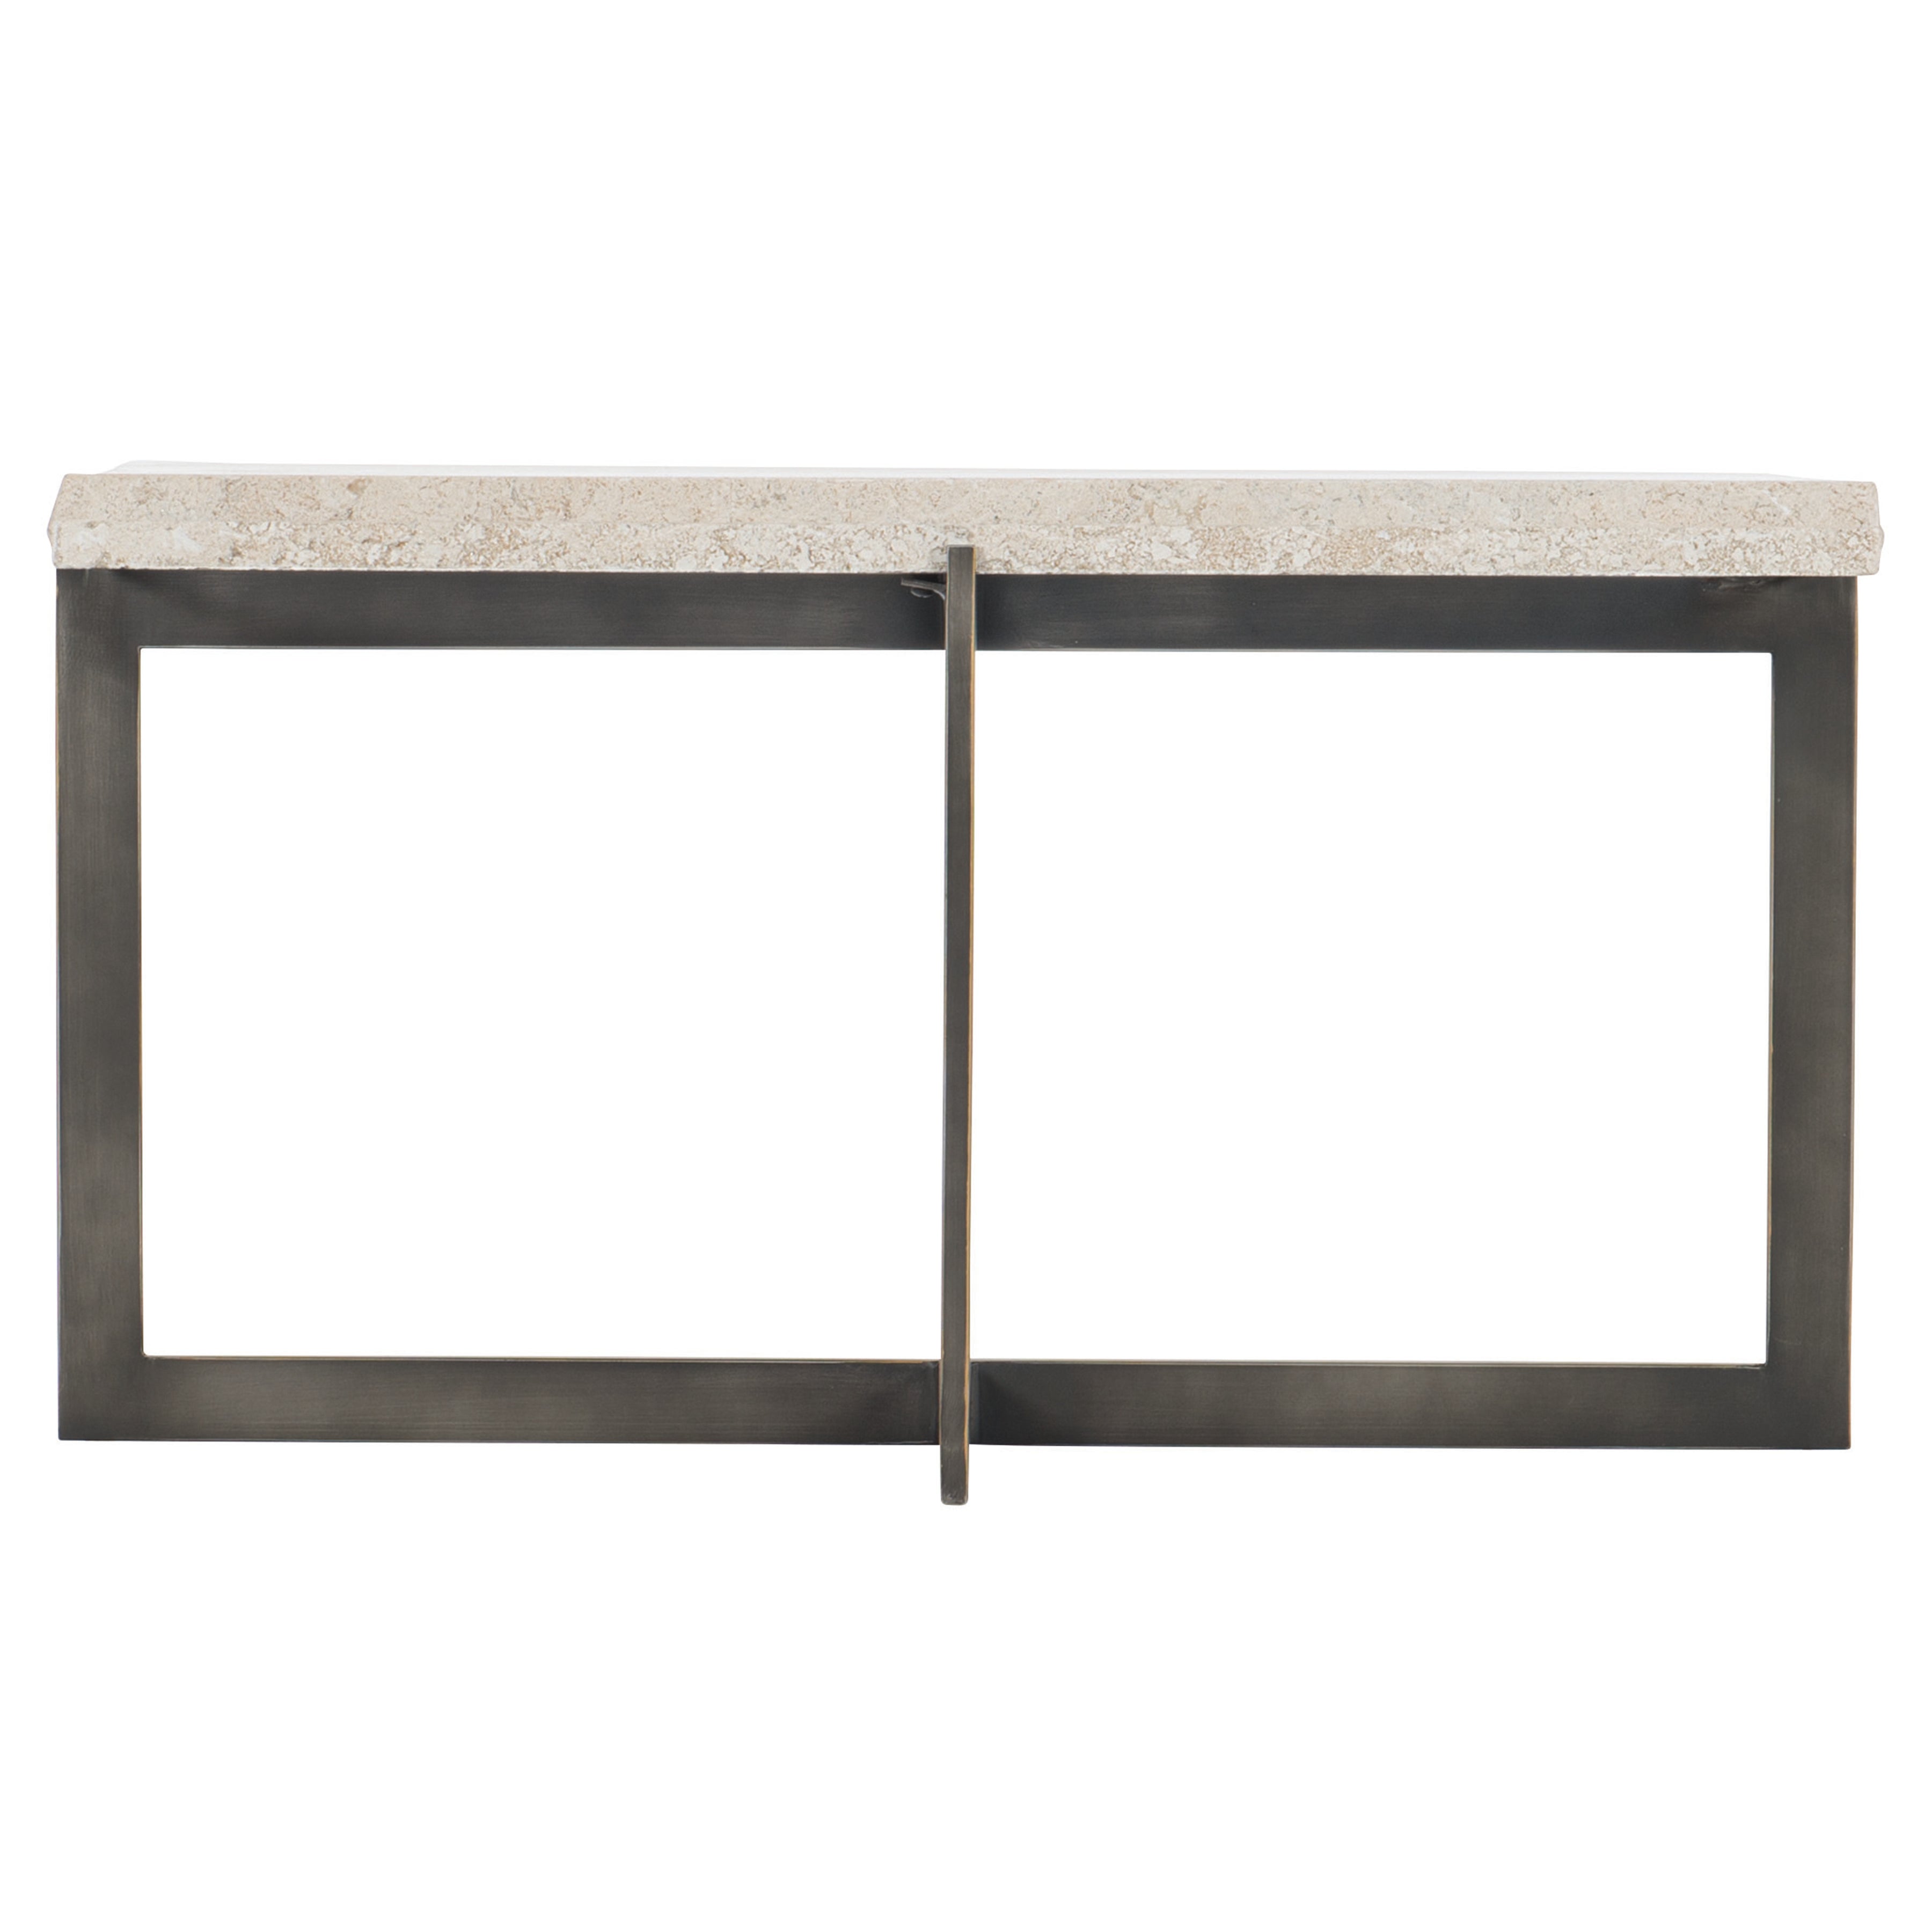 Hathaway Metal Bunching Cocktail Table